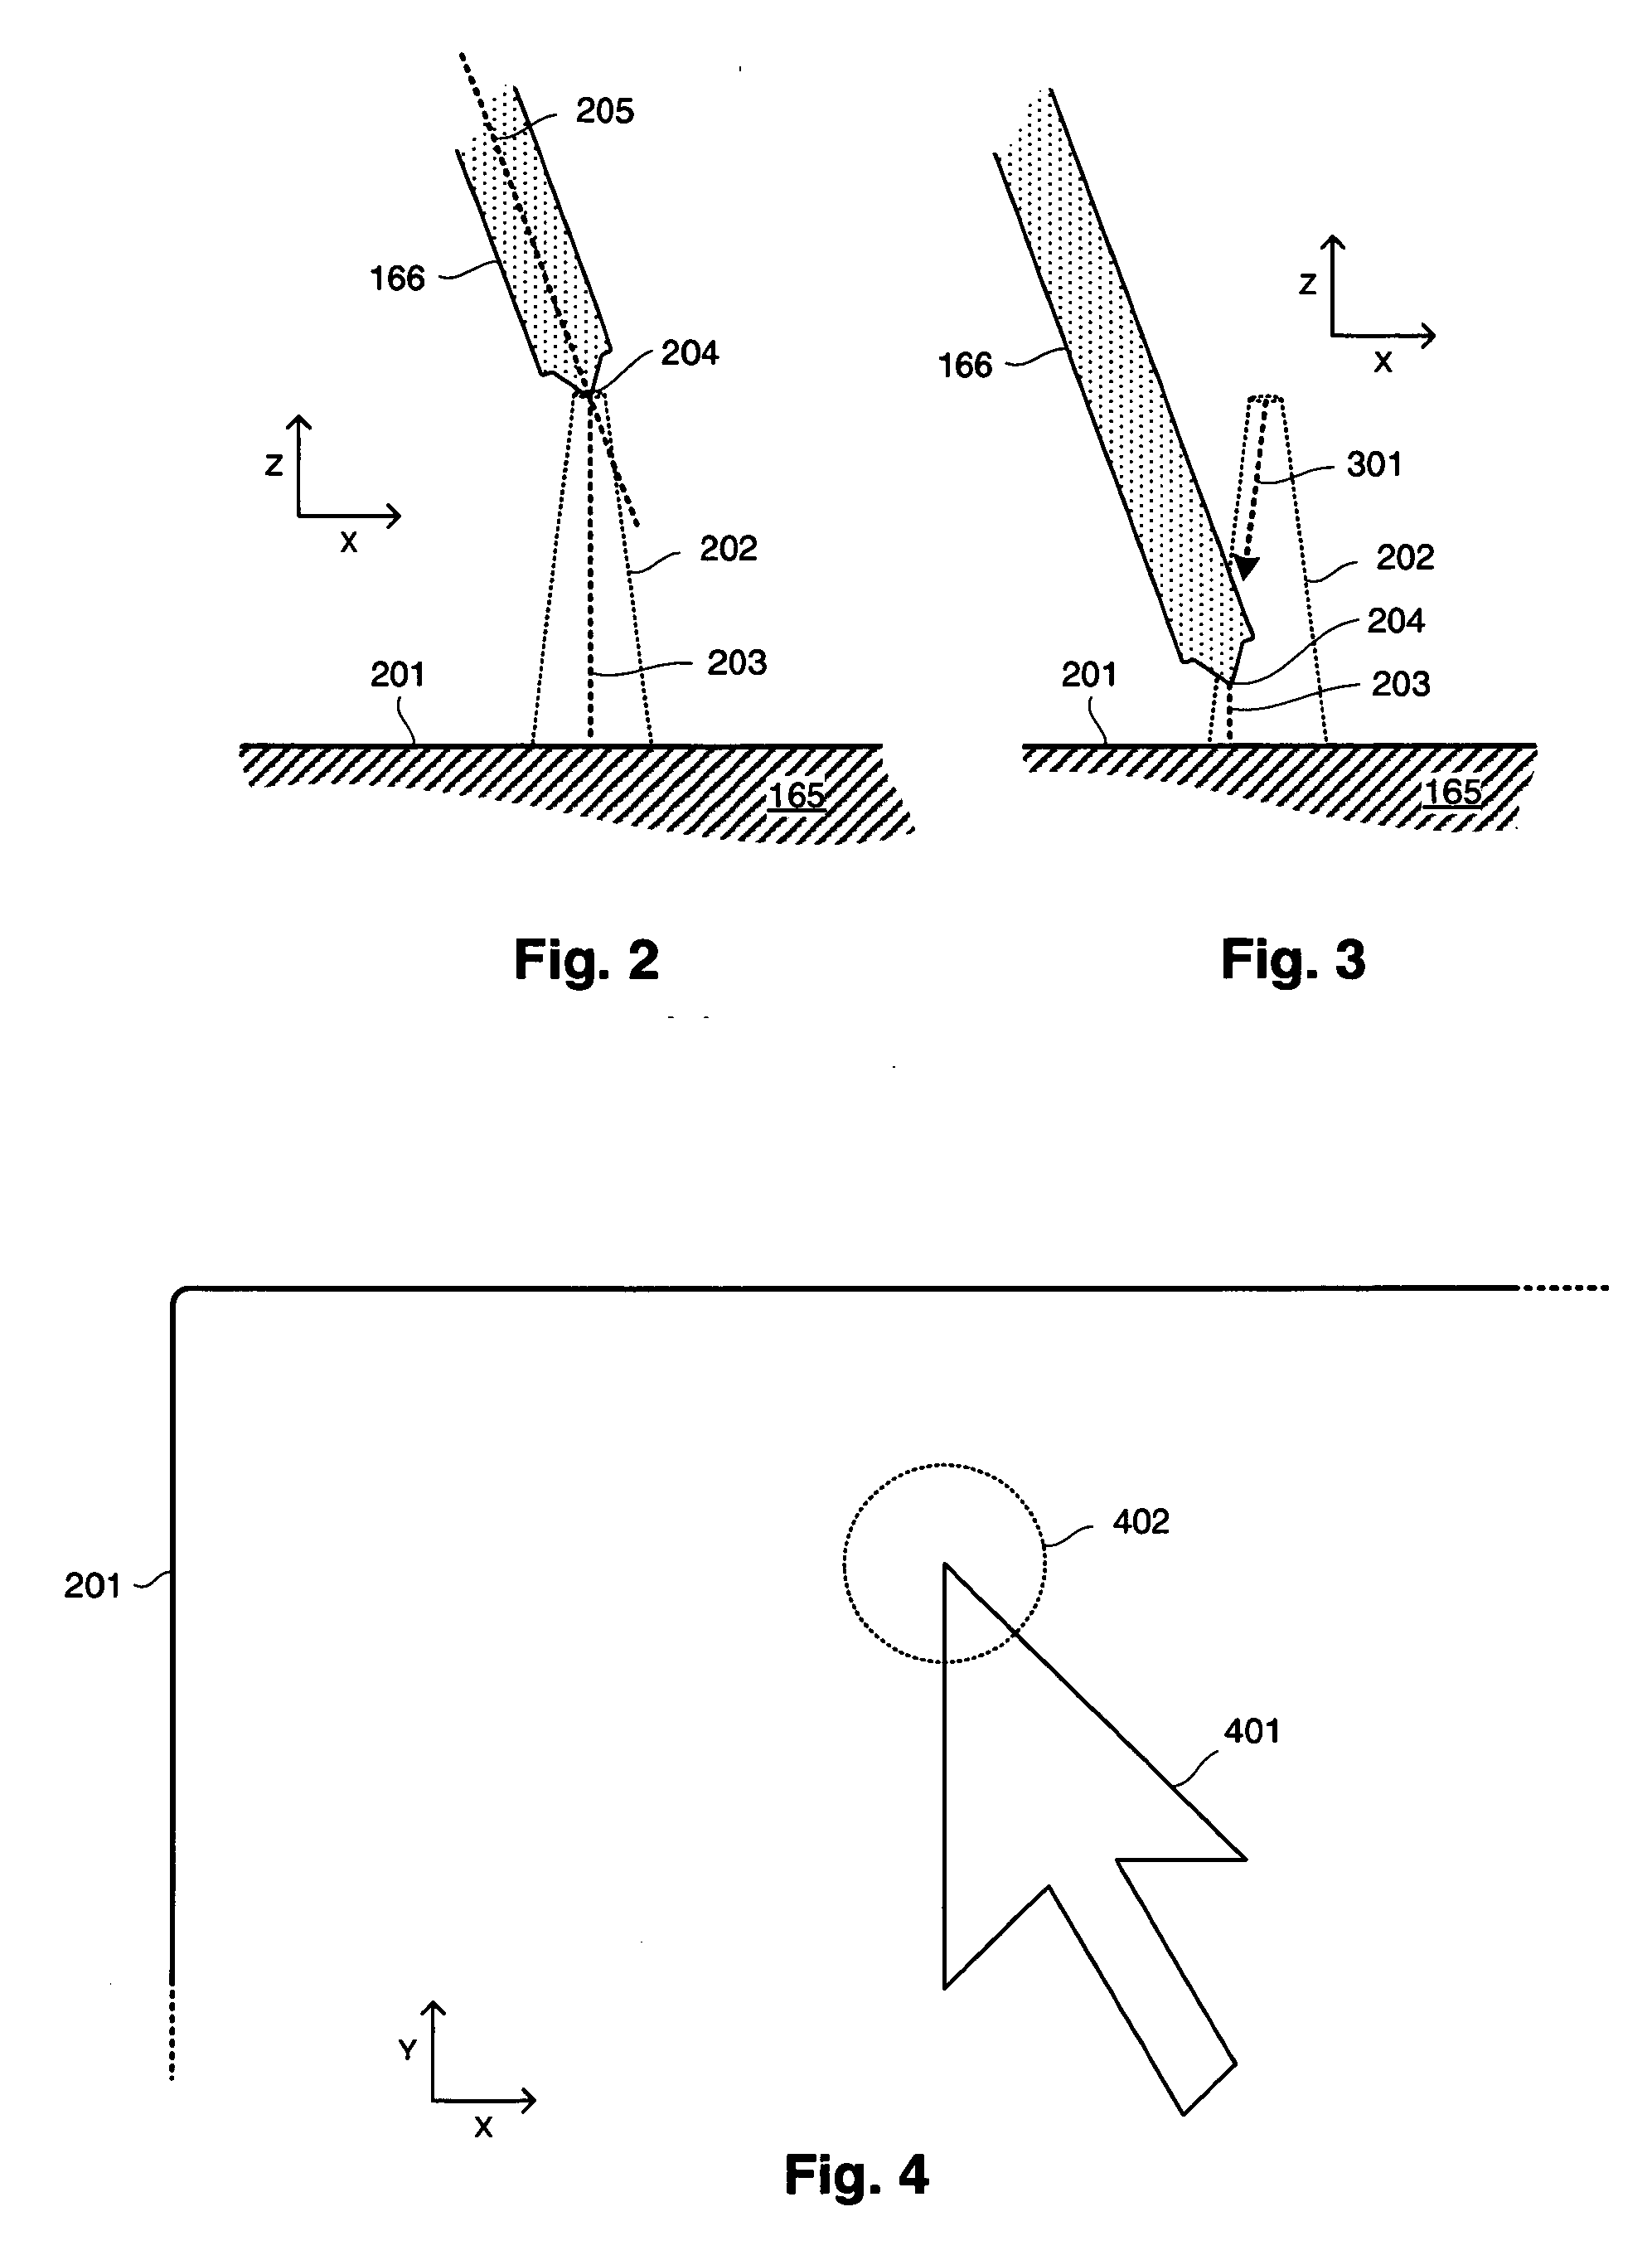 Targeting in a stylus-based user interface